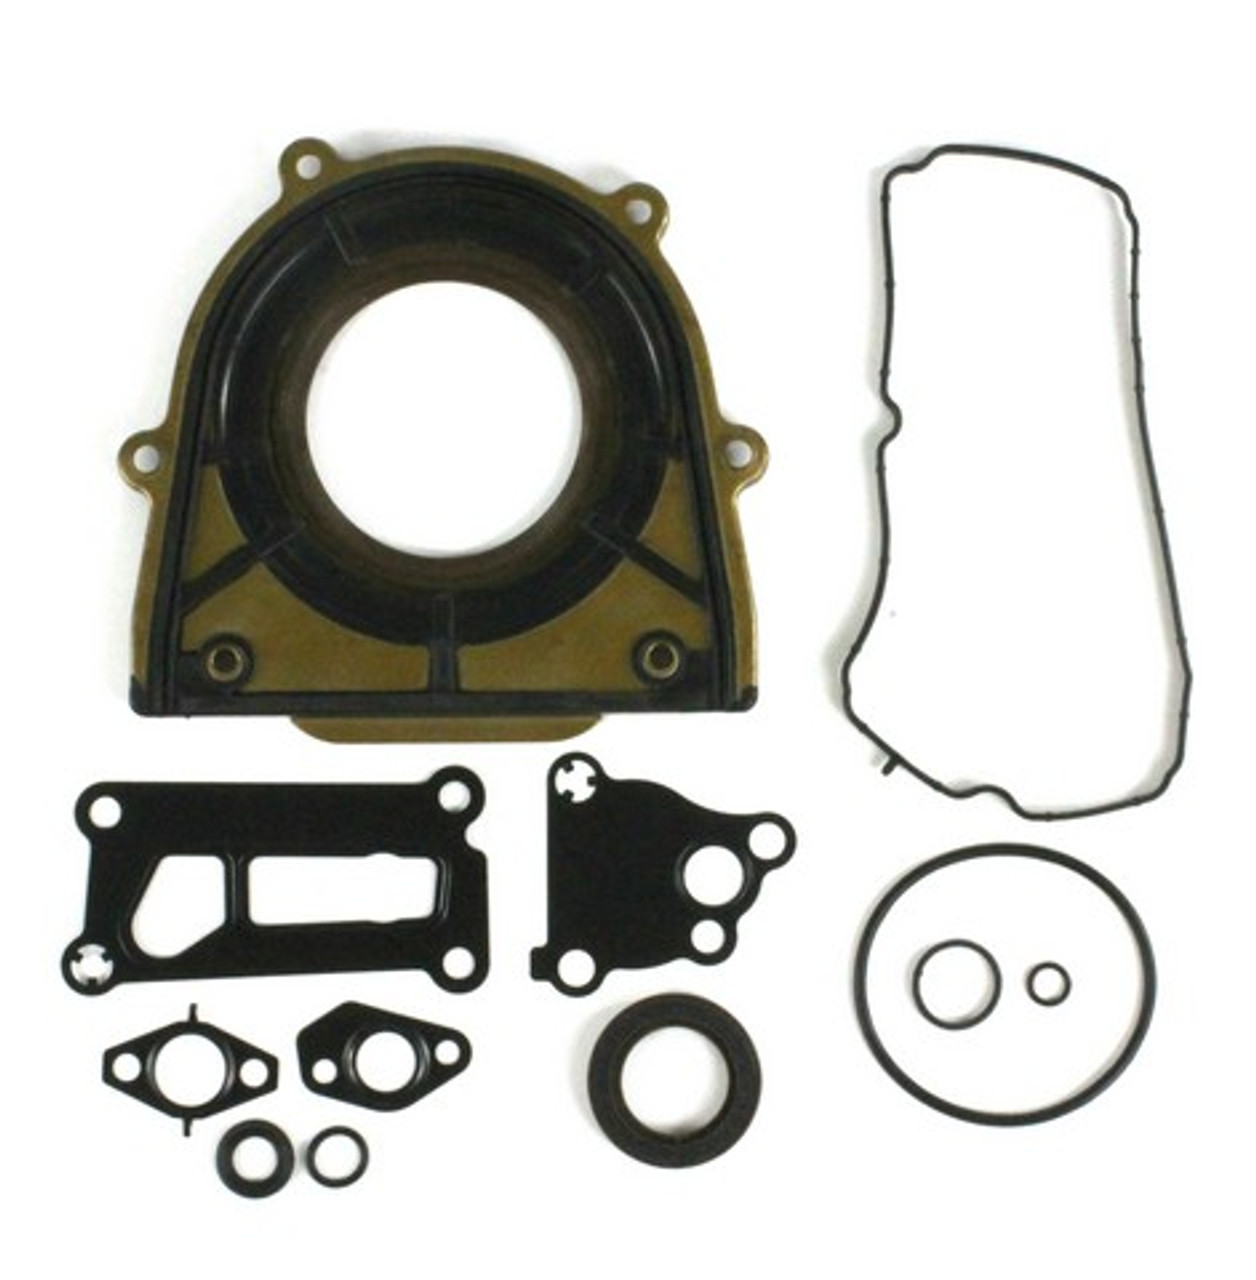 2010 Ford Transit Connect 2.0L Lower Gasket Set LGS4032.E32